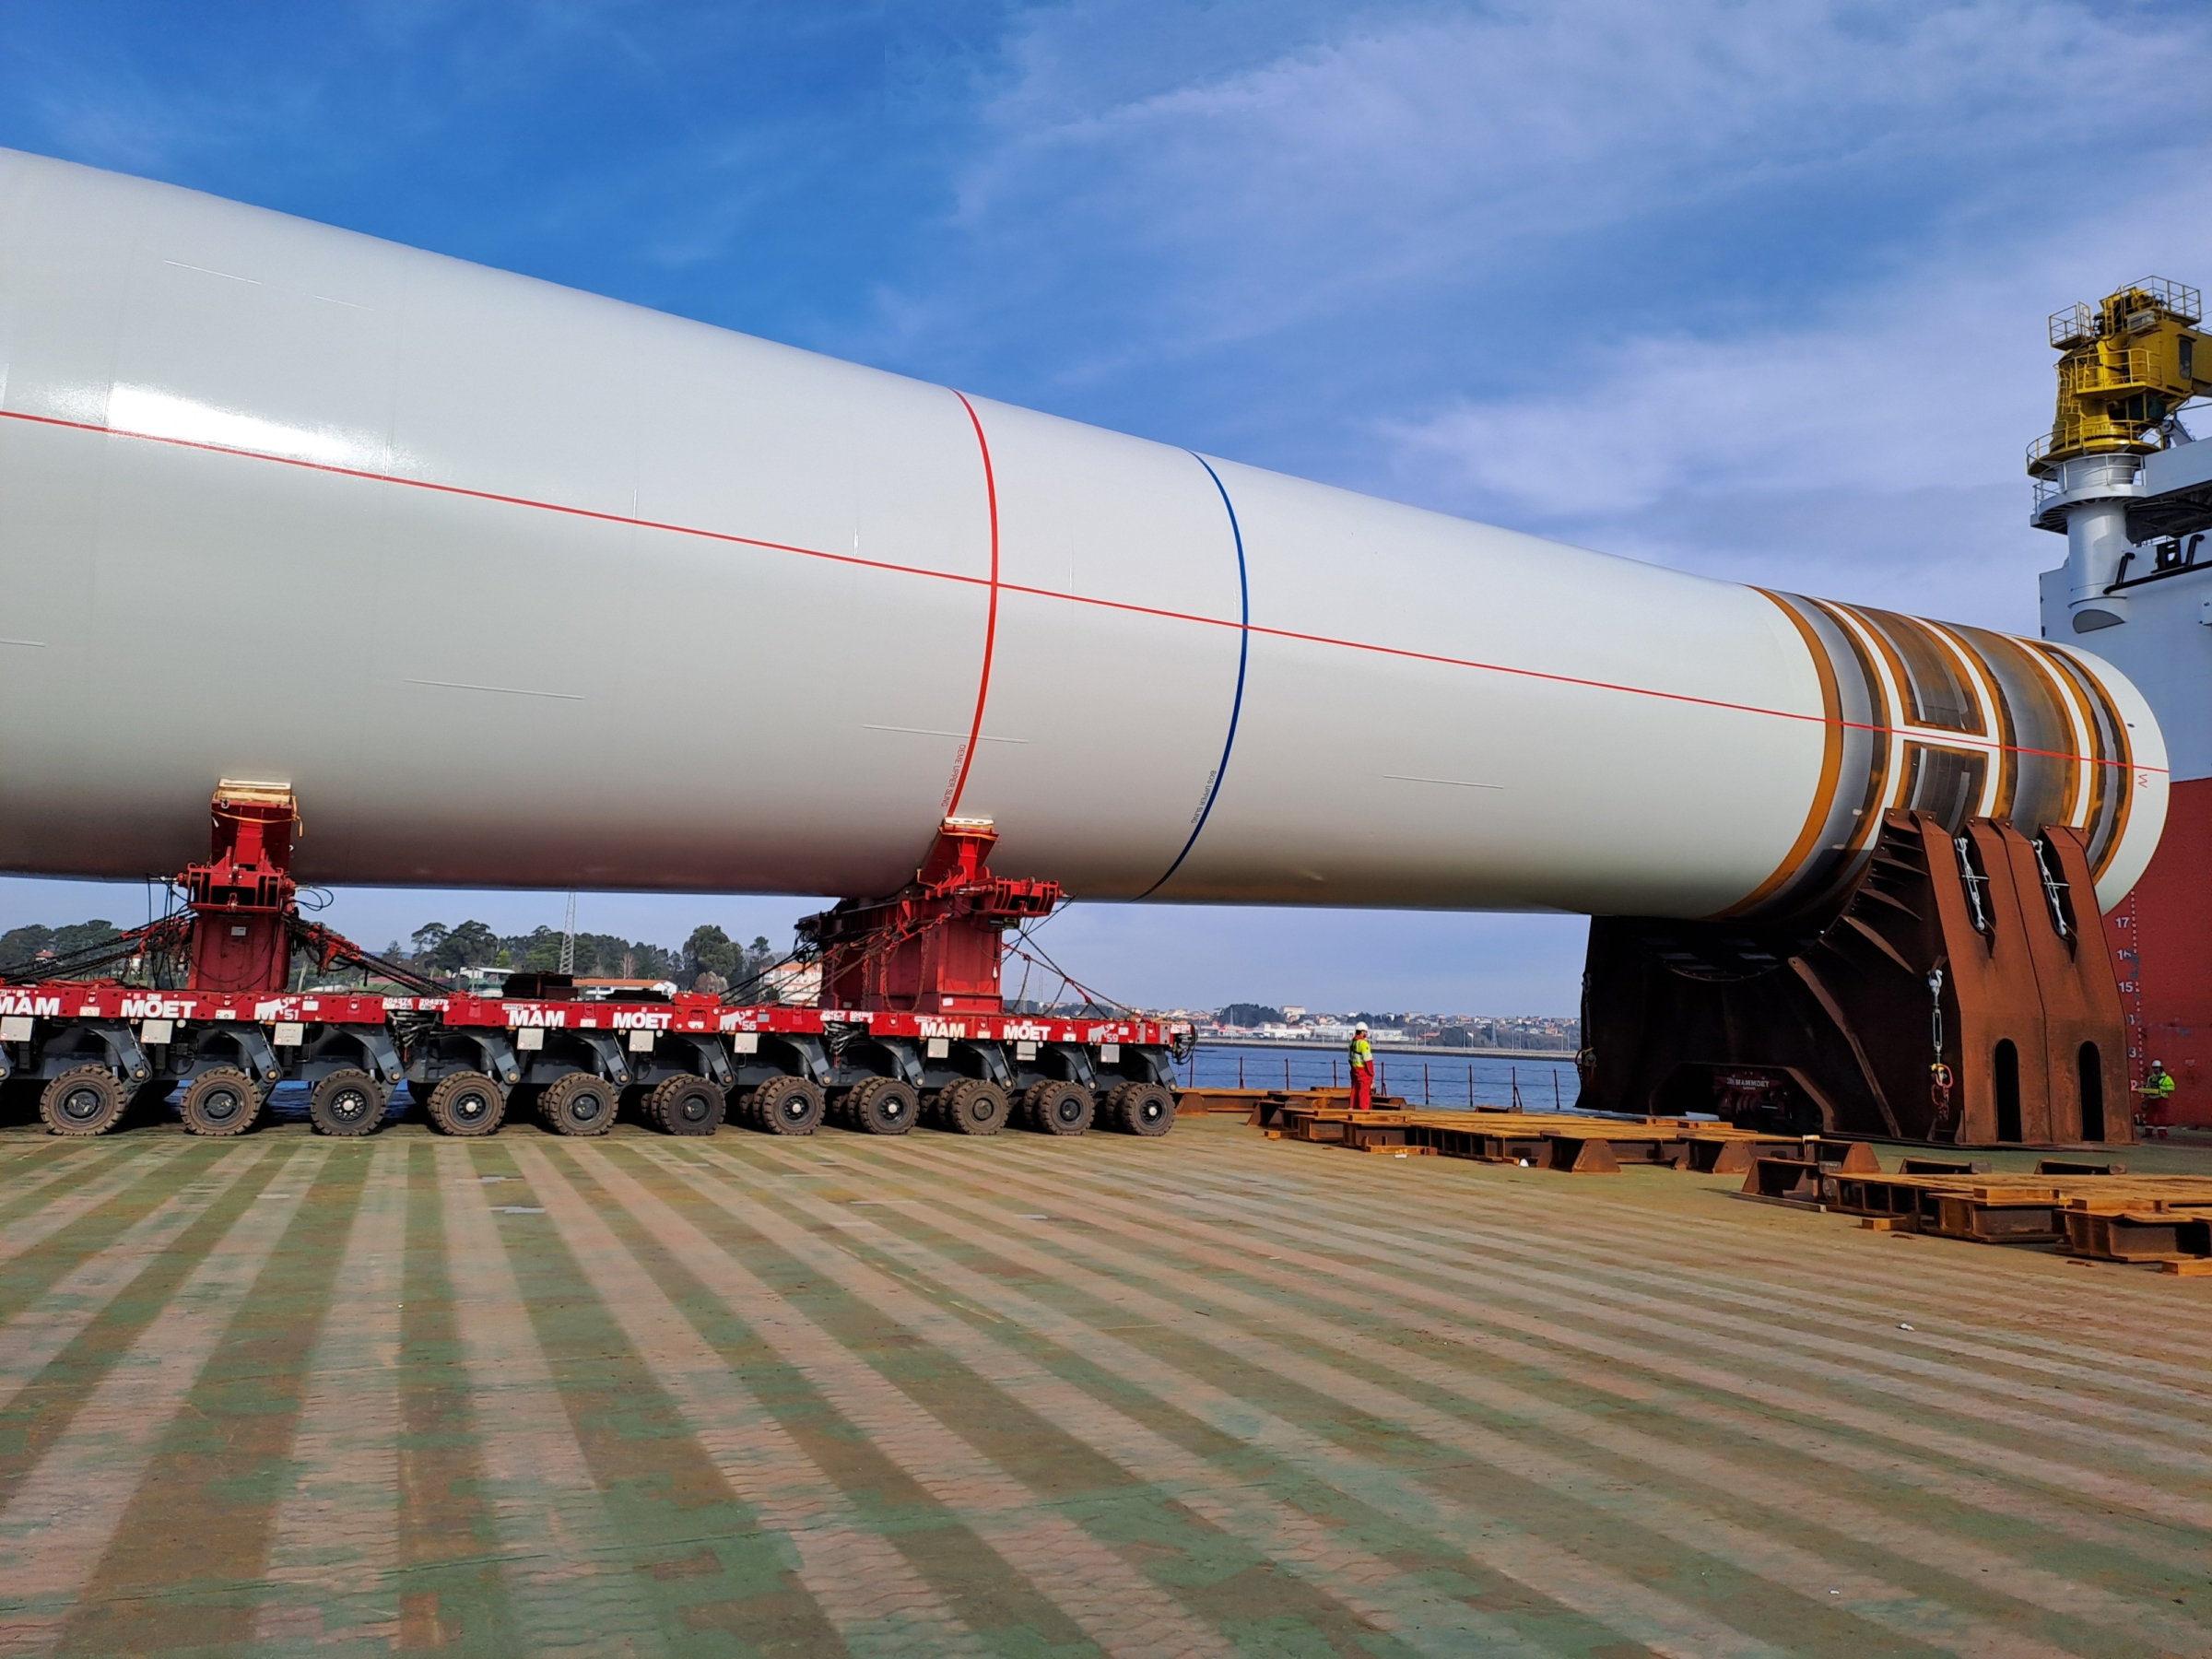 14 XXL monopiles readied for installation with efficient movements and specialized equipment